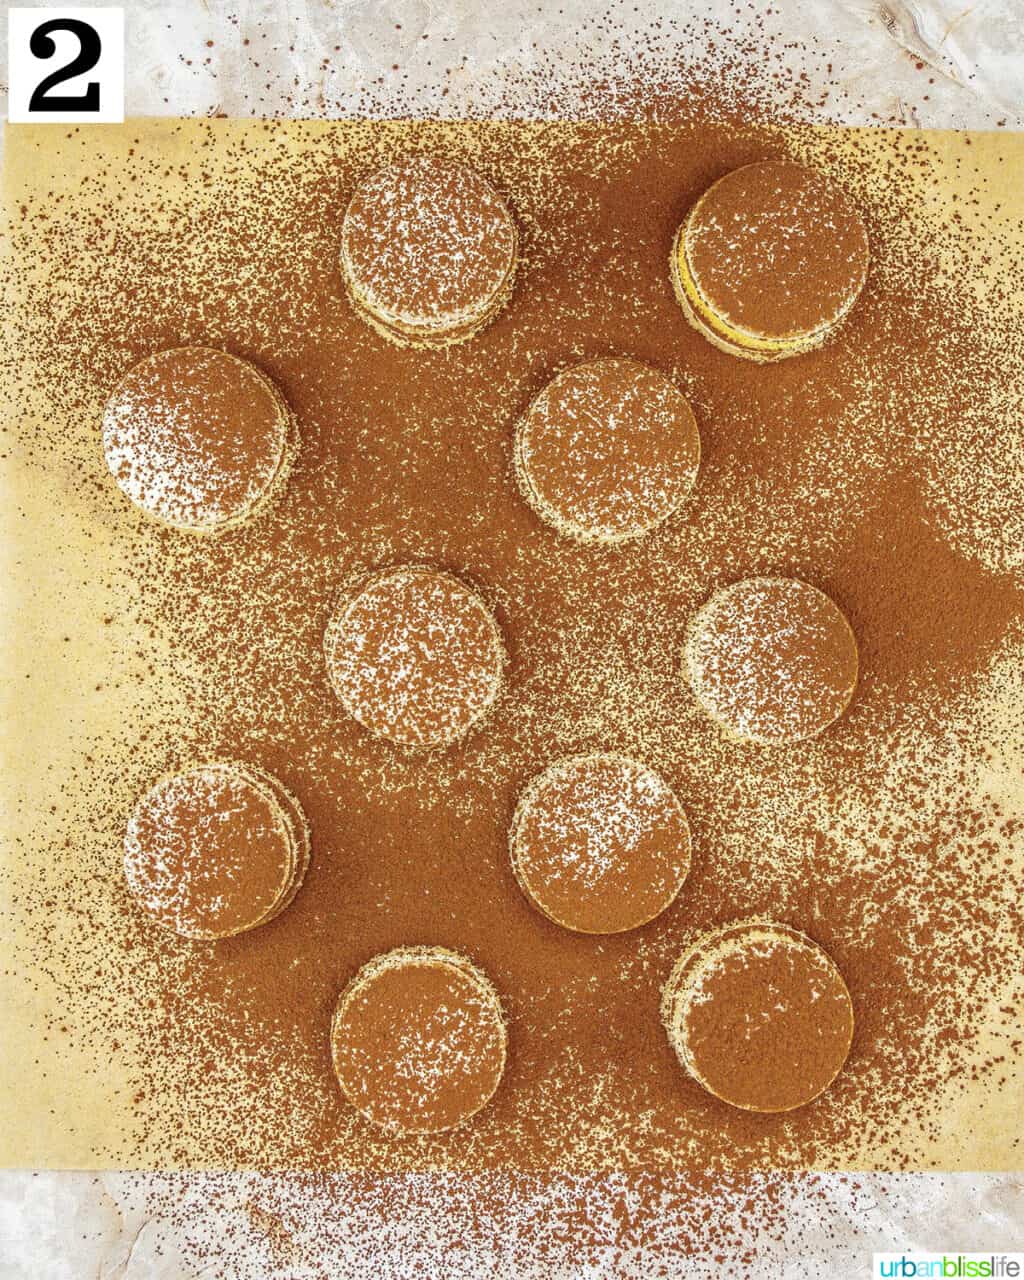 macaron shells dusted with cocoa powder.